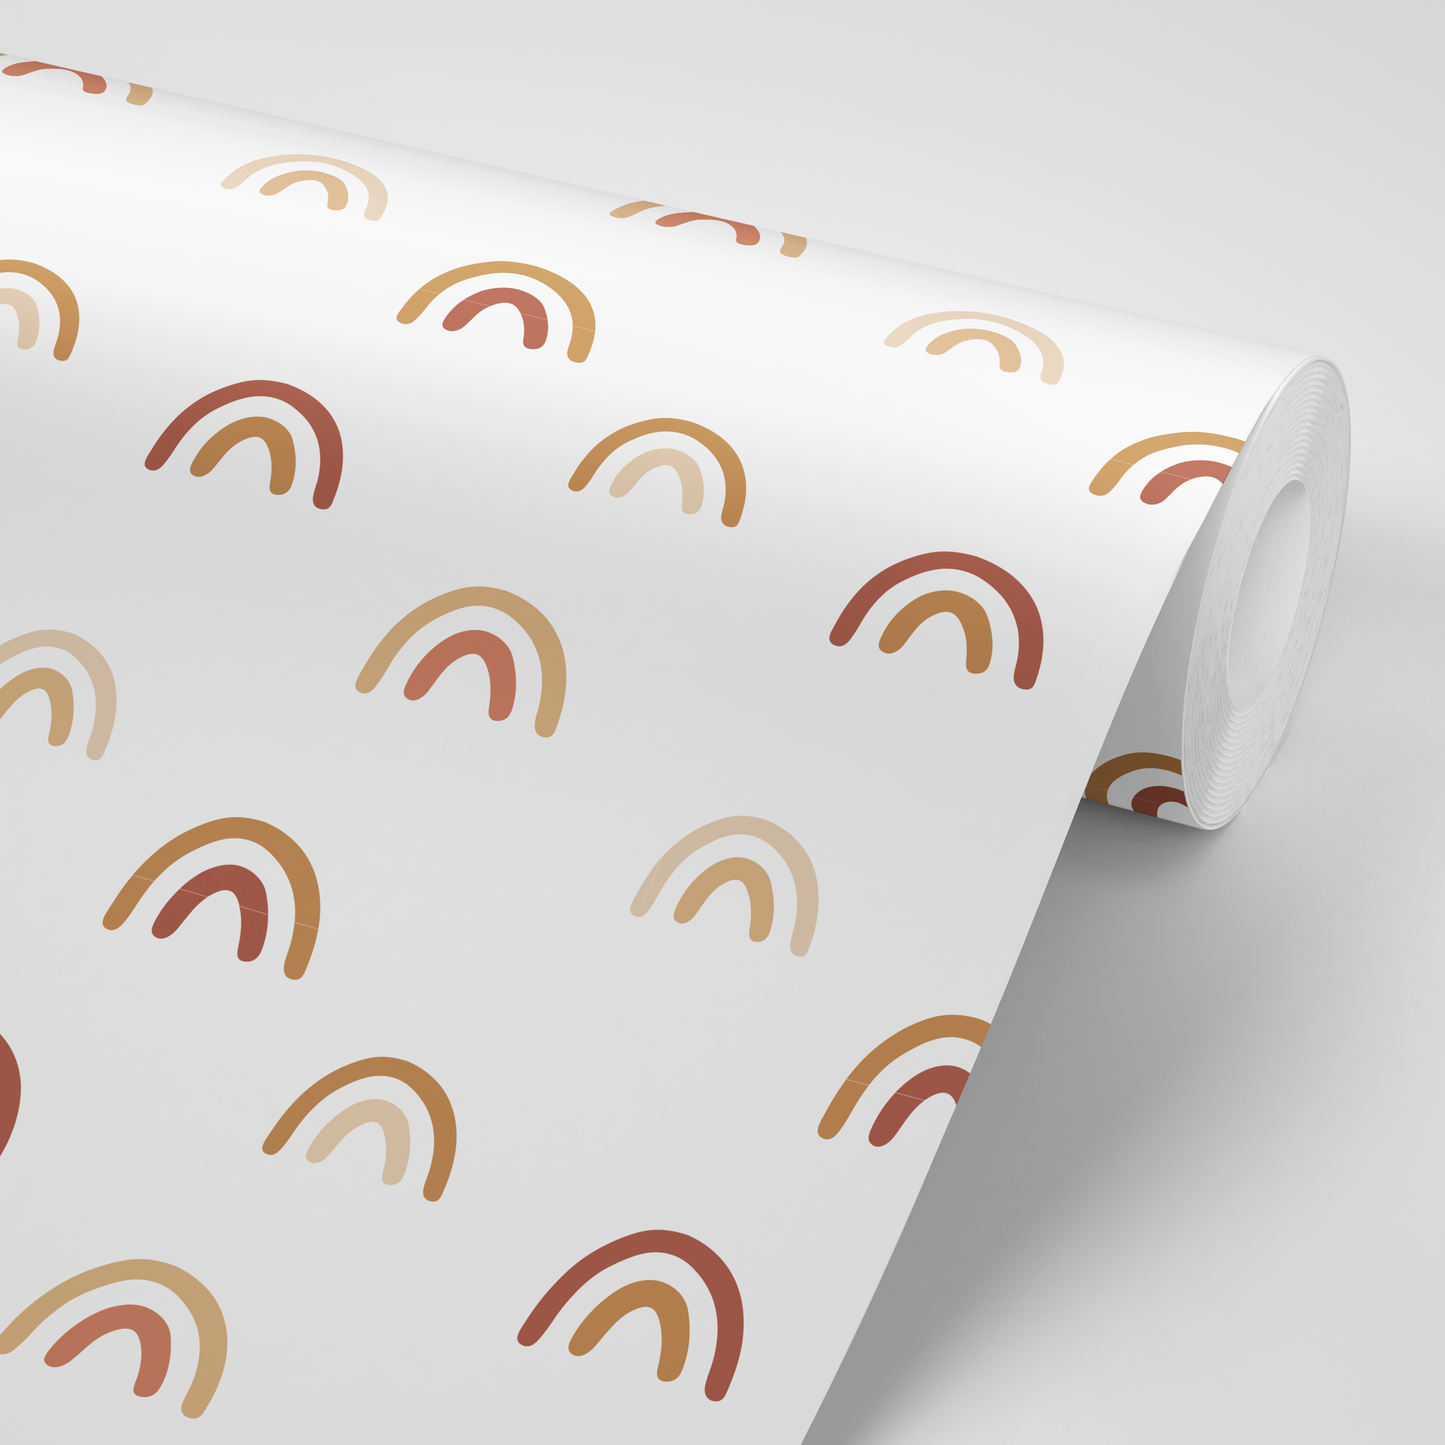 Rainbow Rust Contact Paper  - pack of 3 rolls (24x48" each)